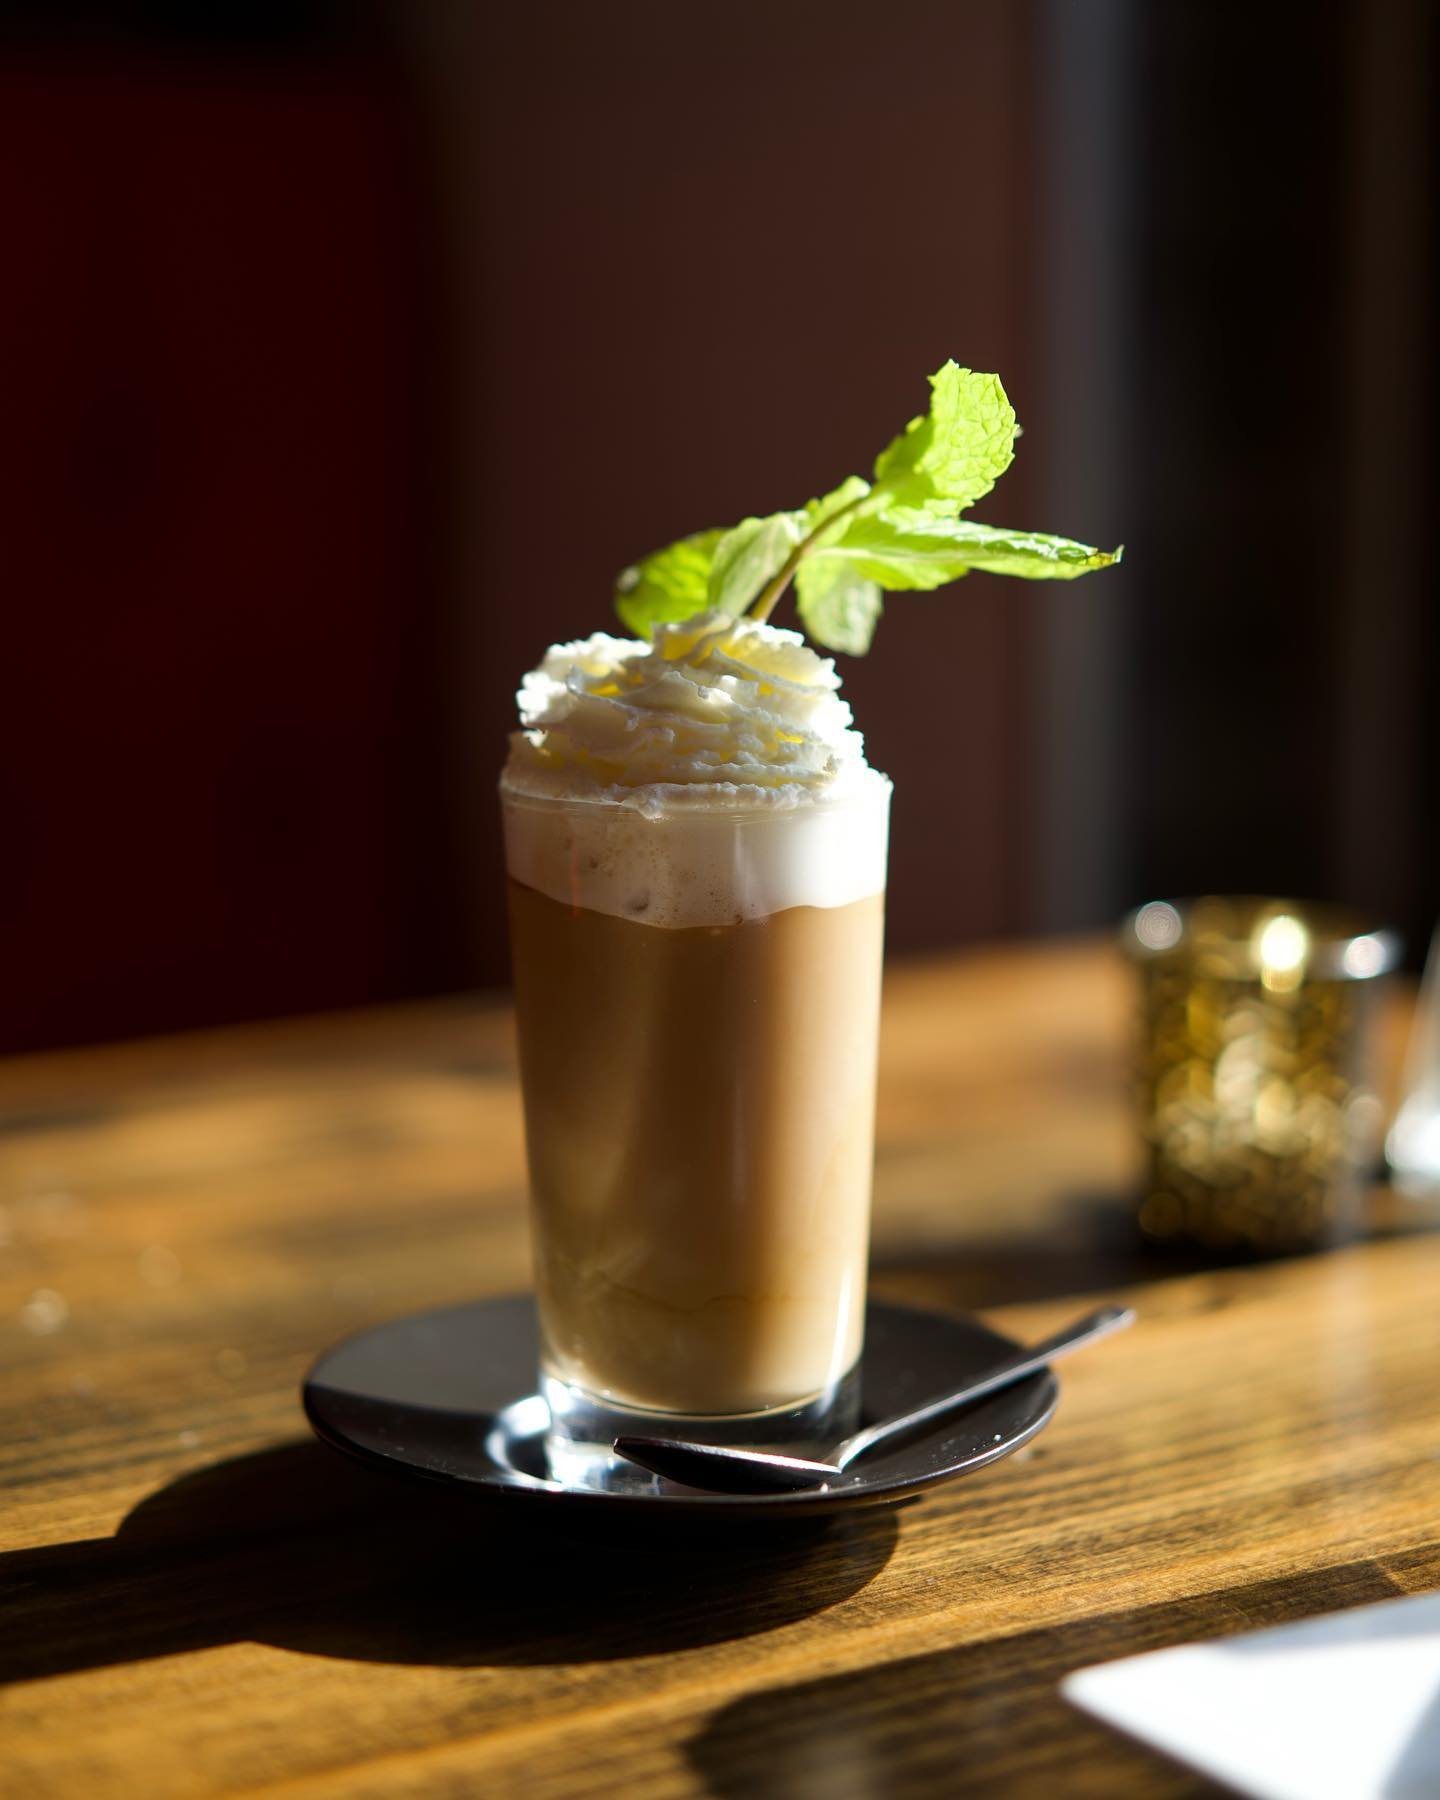 Drinks at J's On The Bay? Why not? Come try our delicious Irish Coffee. Here at Js On The Bay, we have new fall drinks for you to enjoy! Our Fall Drink Menu has many options for you to choose from. Make a reservation today using Open Table or call us